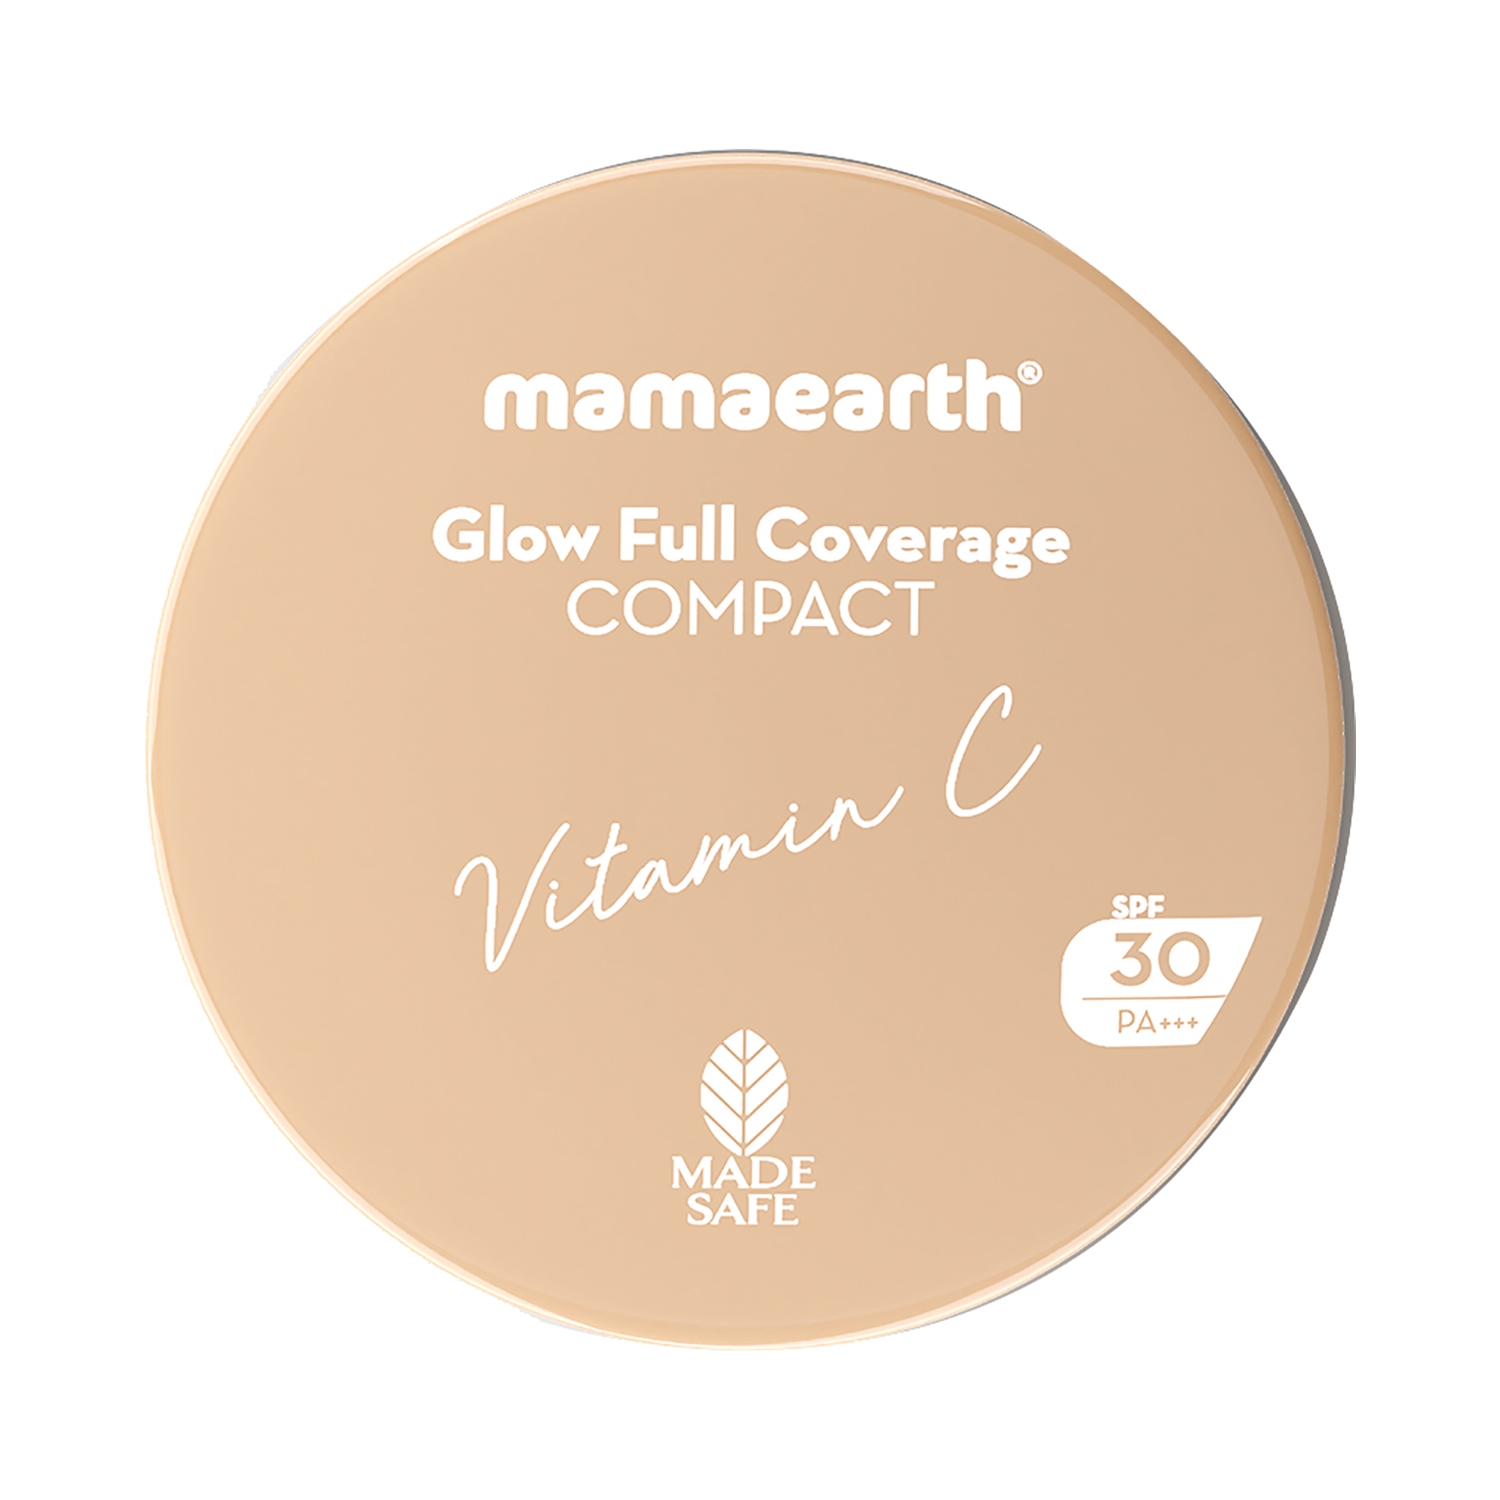 Mamaearth Glow Full Coverage Compact SPF 30 PA+++ With Vitamin C - 03 Crème Glow (9g)